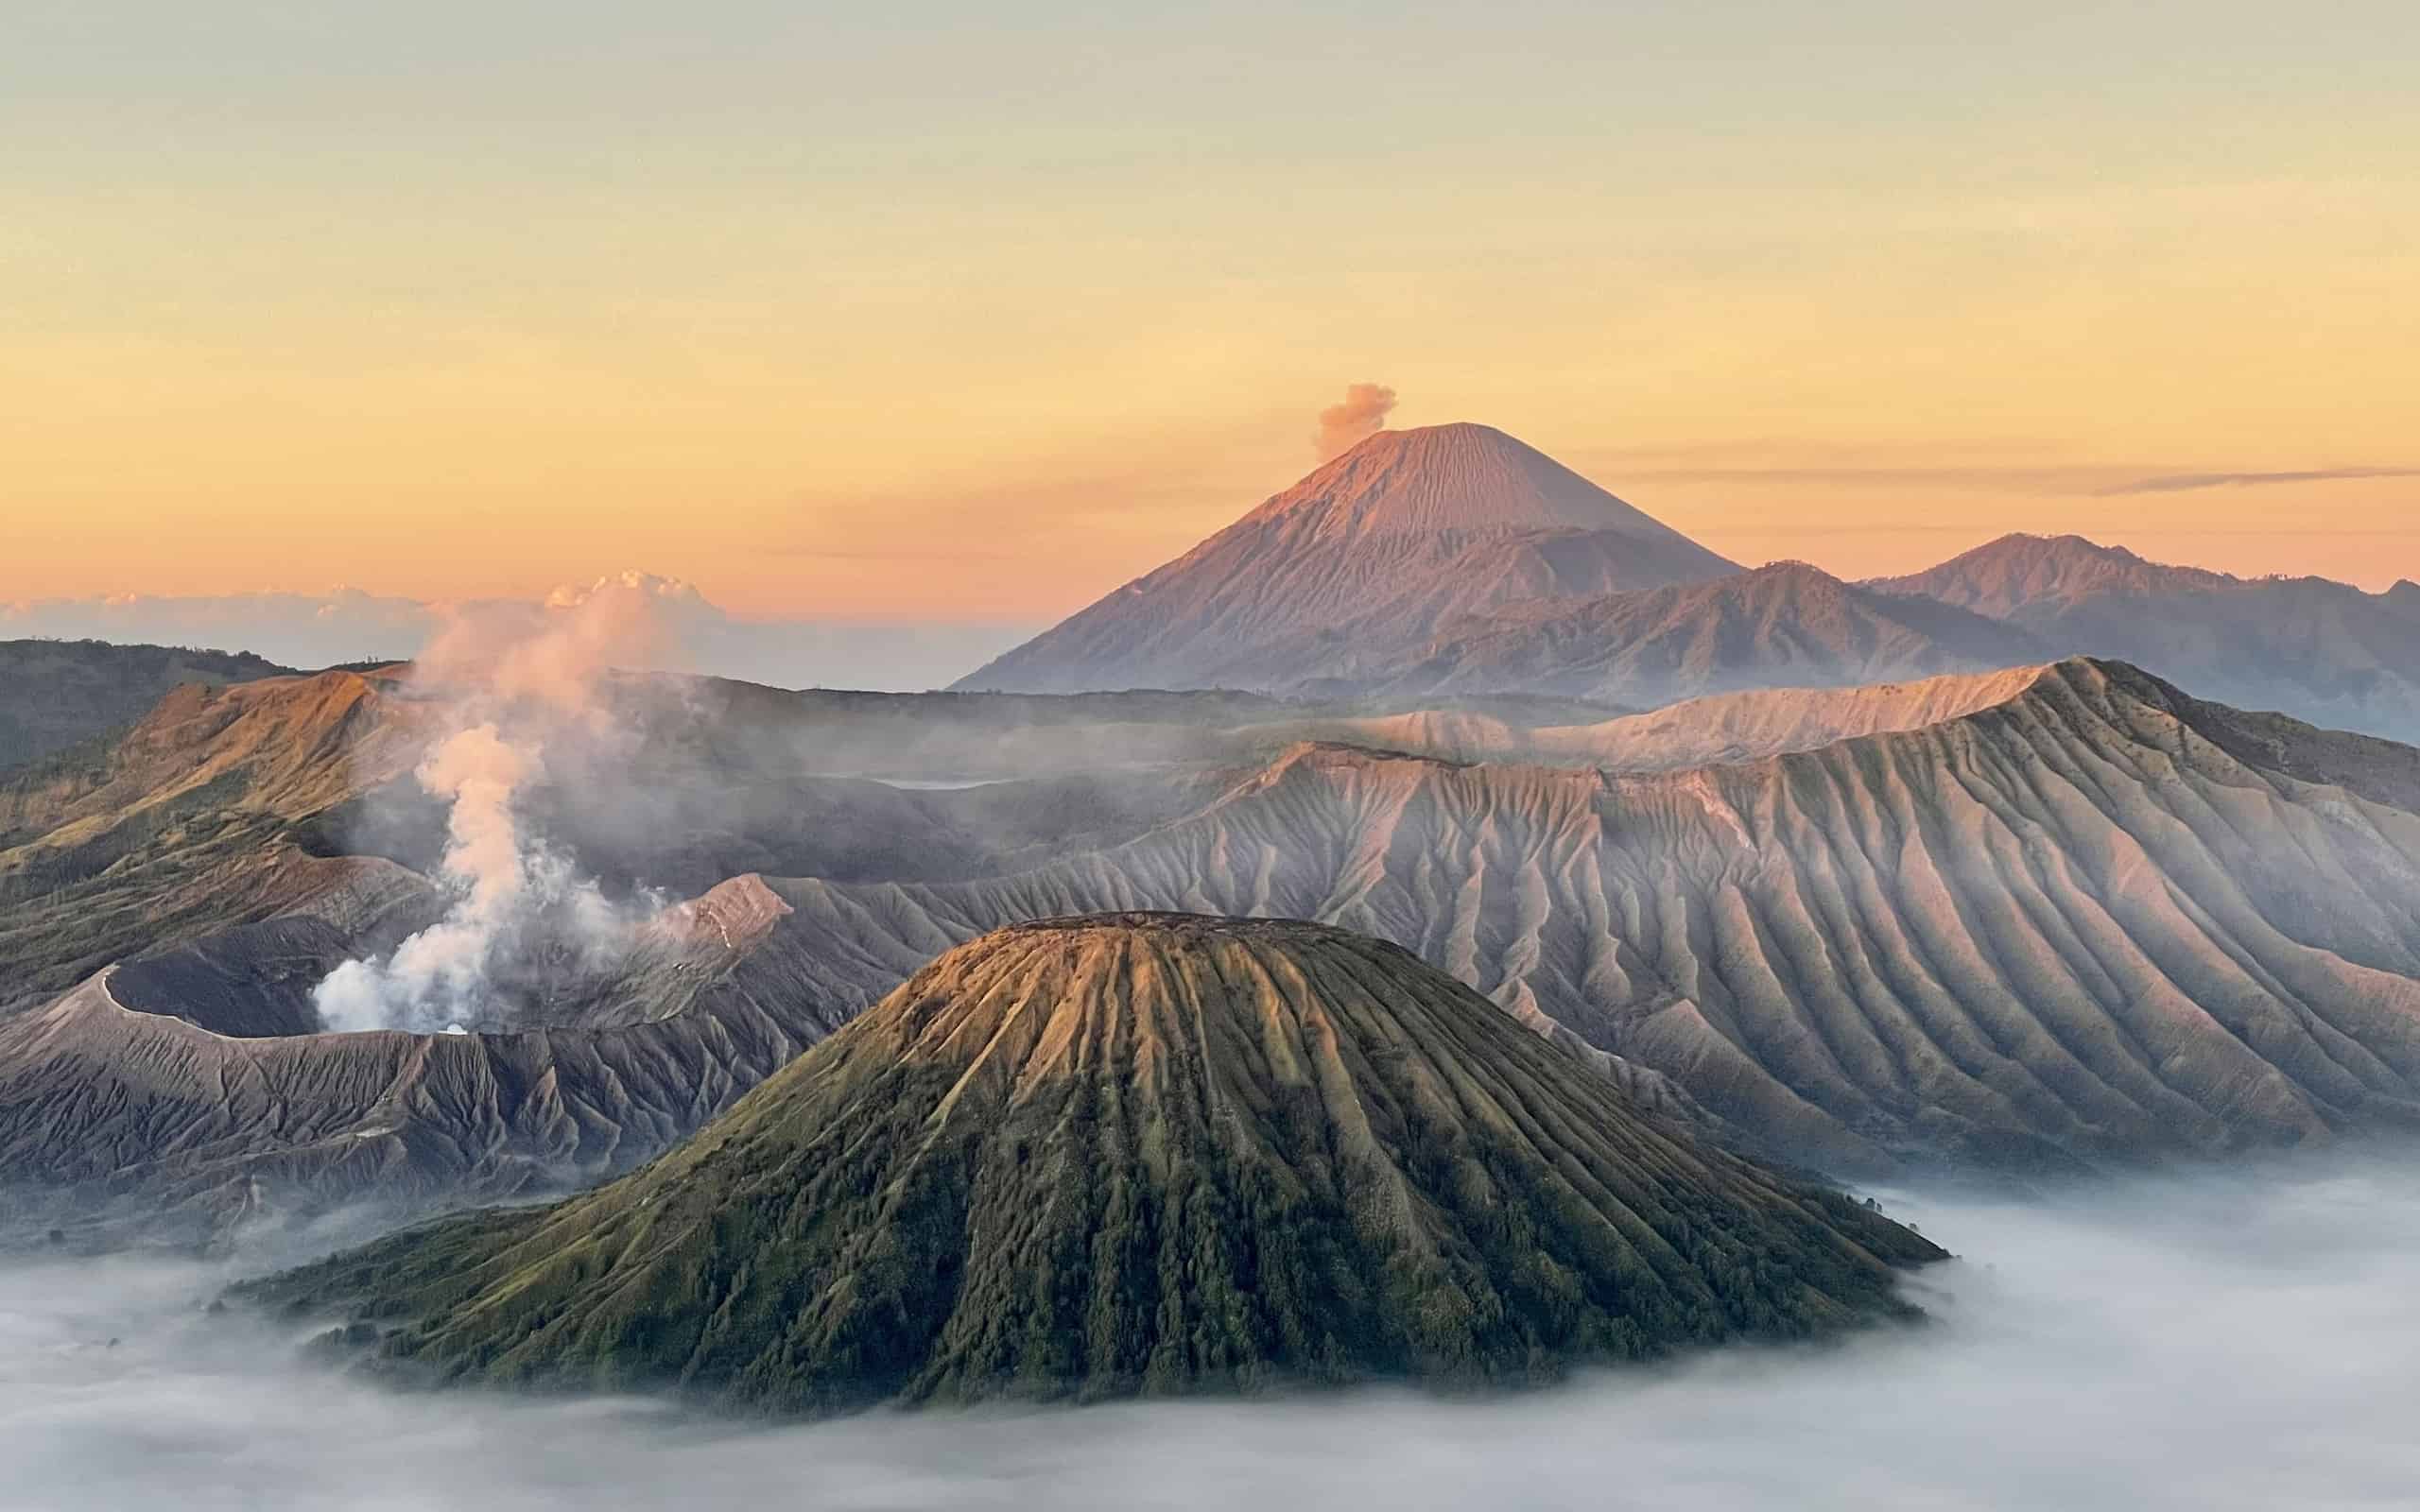 Beautiful above the clouds view of the mountains in Bali.